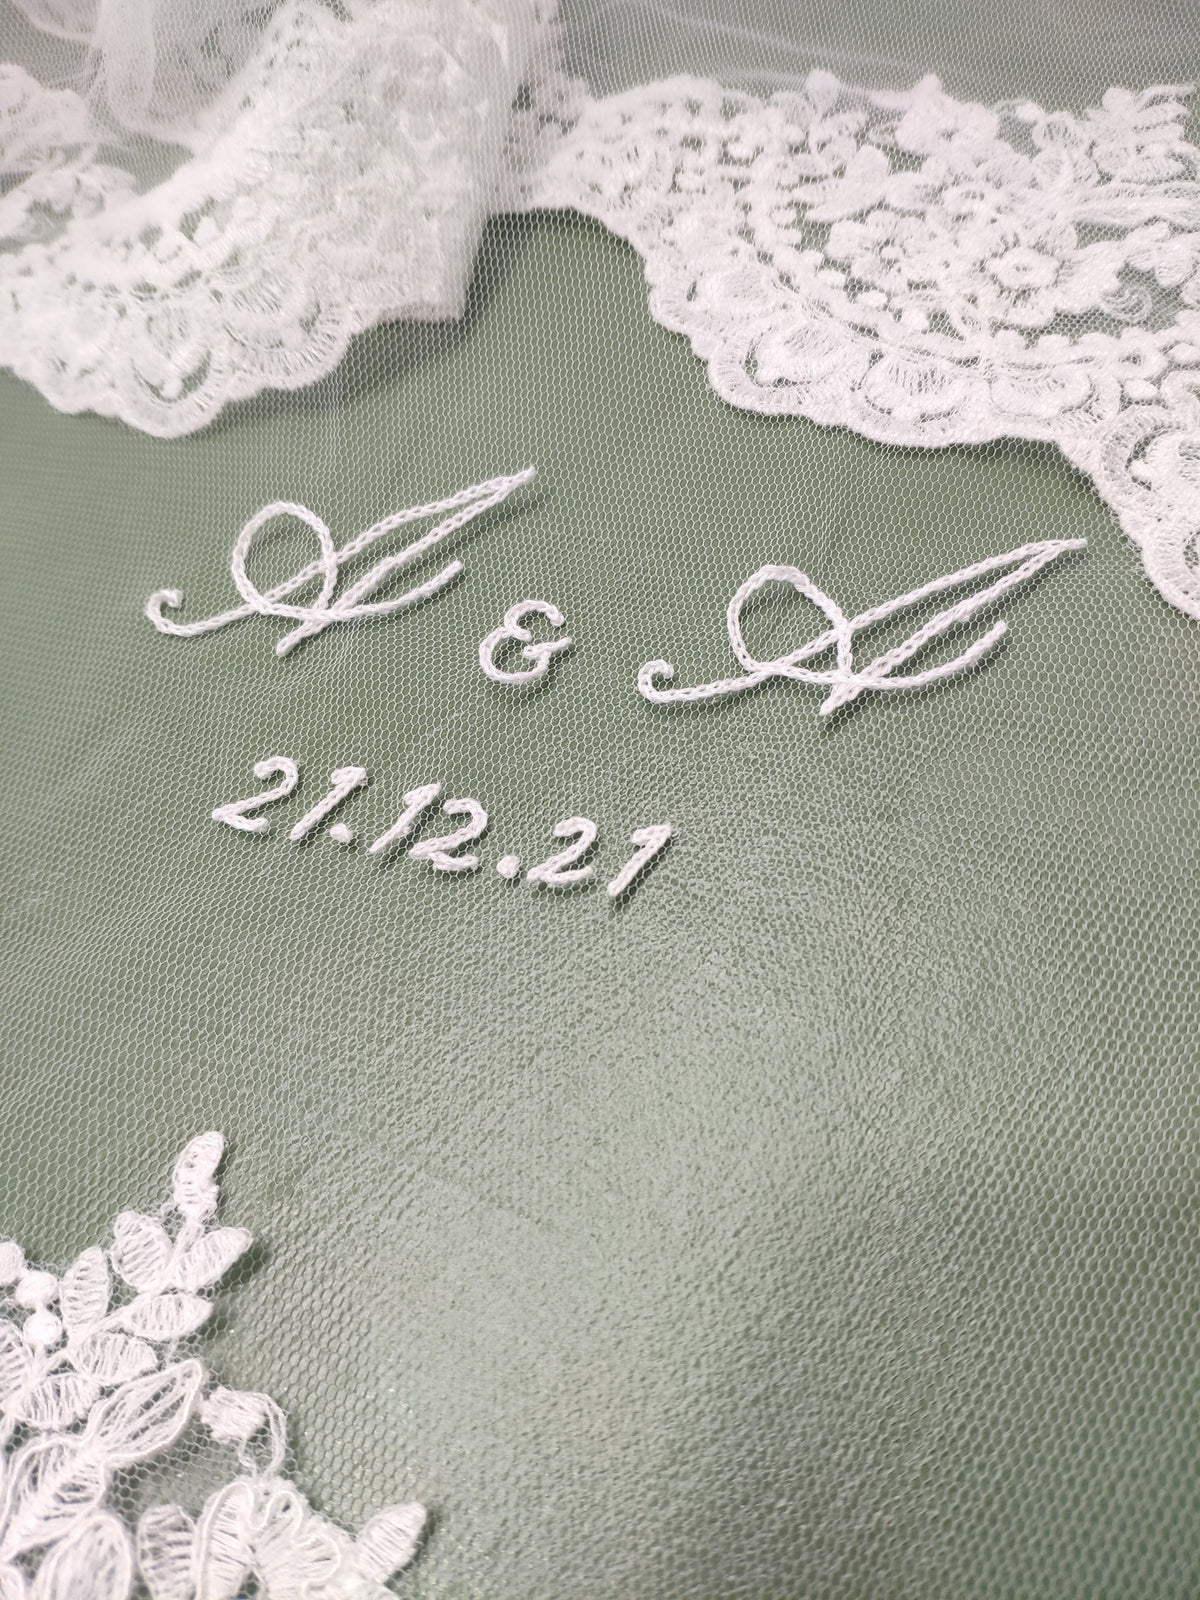 Wedding Veil Embroidery Add Personalised Embroidery to your Veil (6-8 weeks lead time)